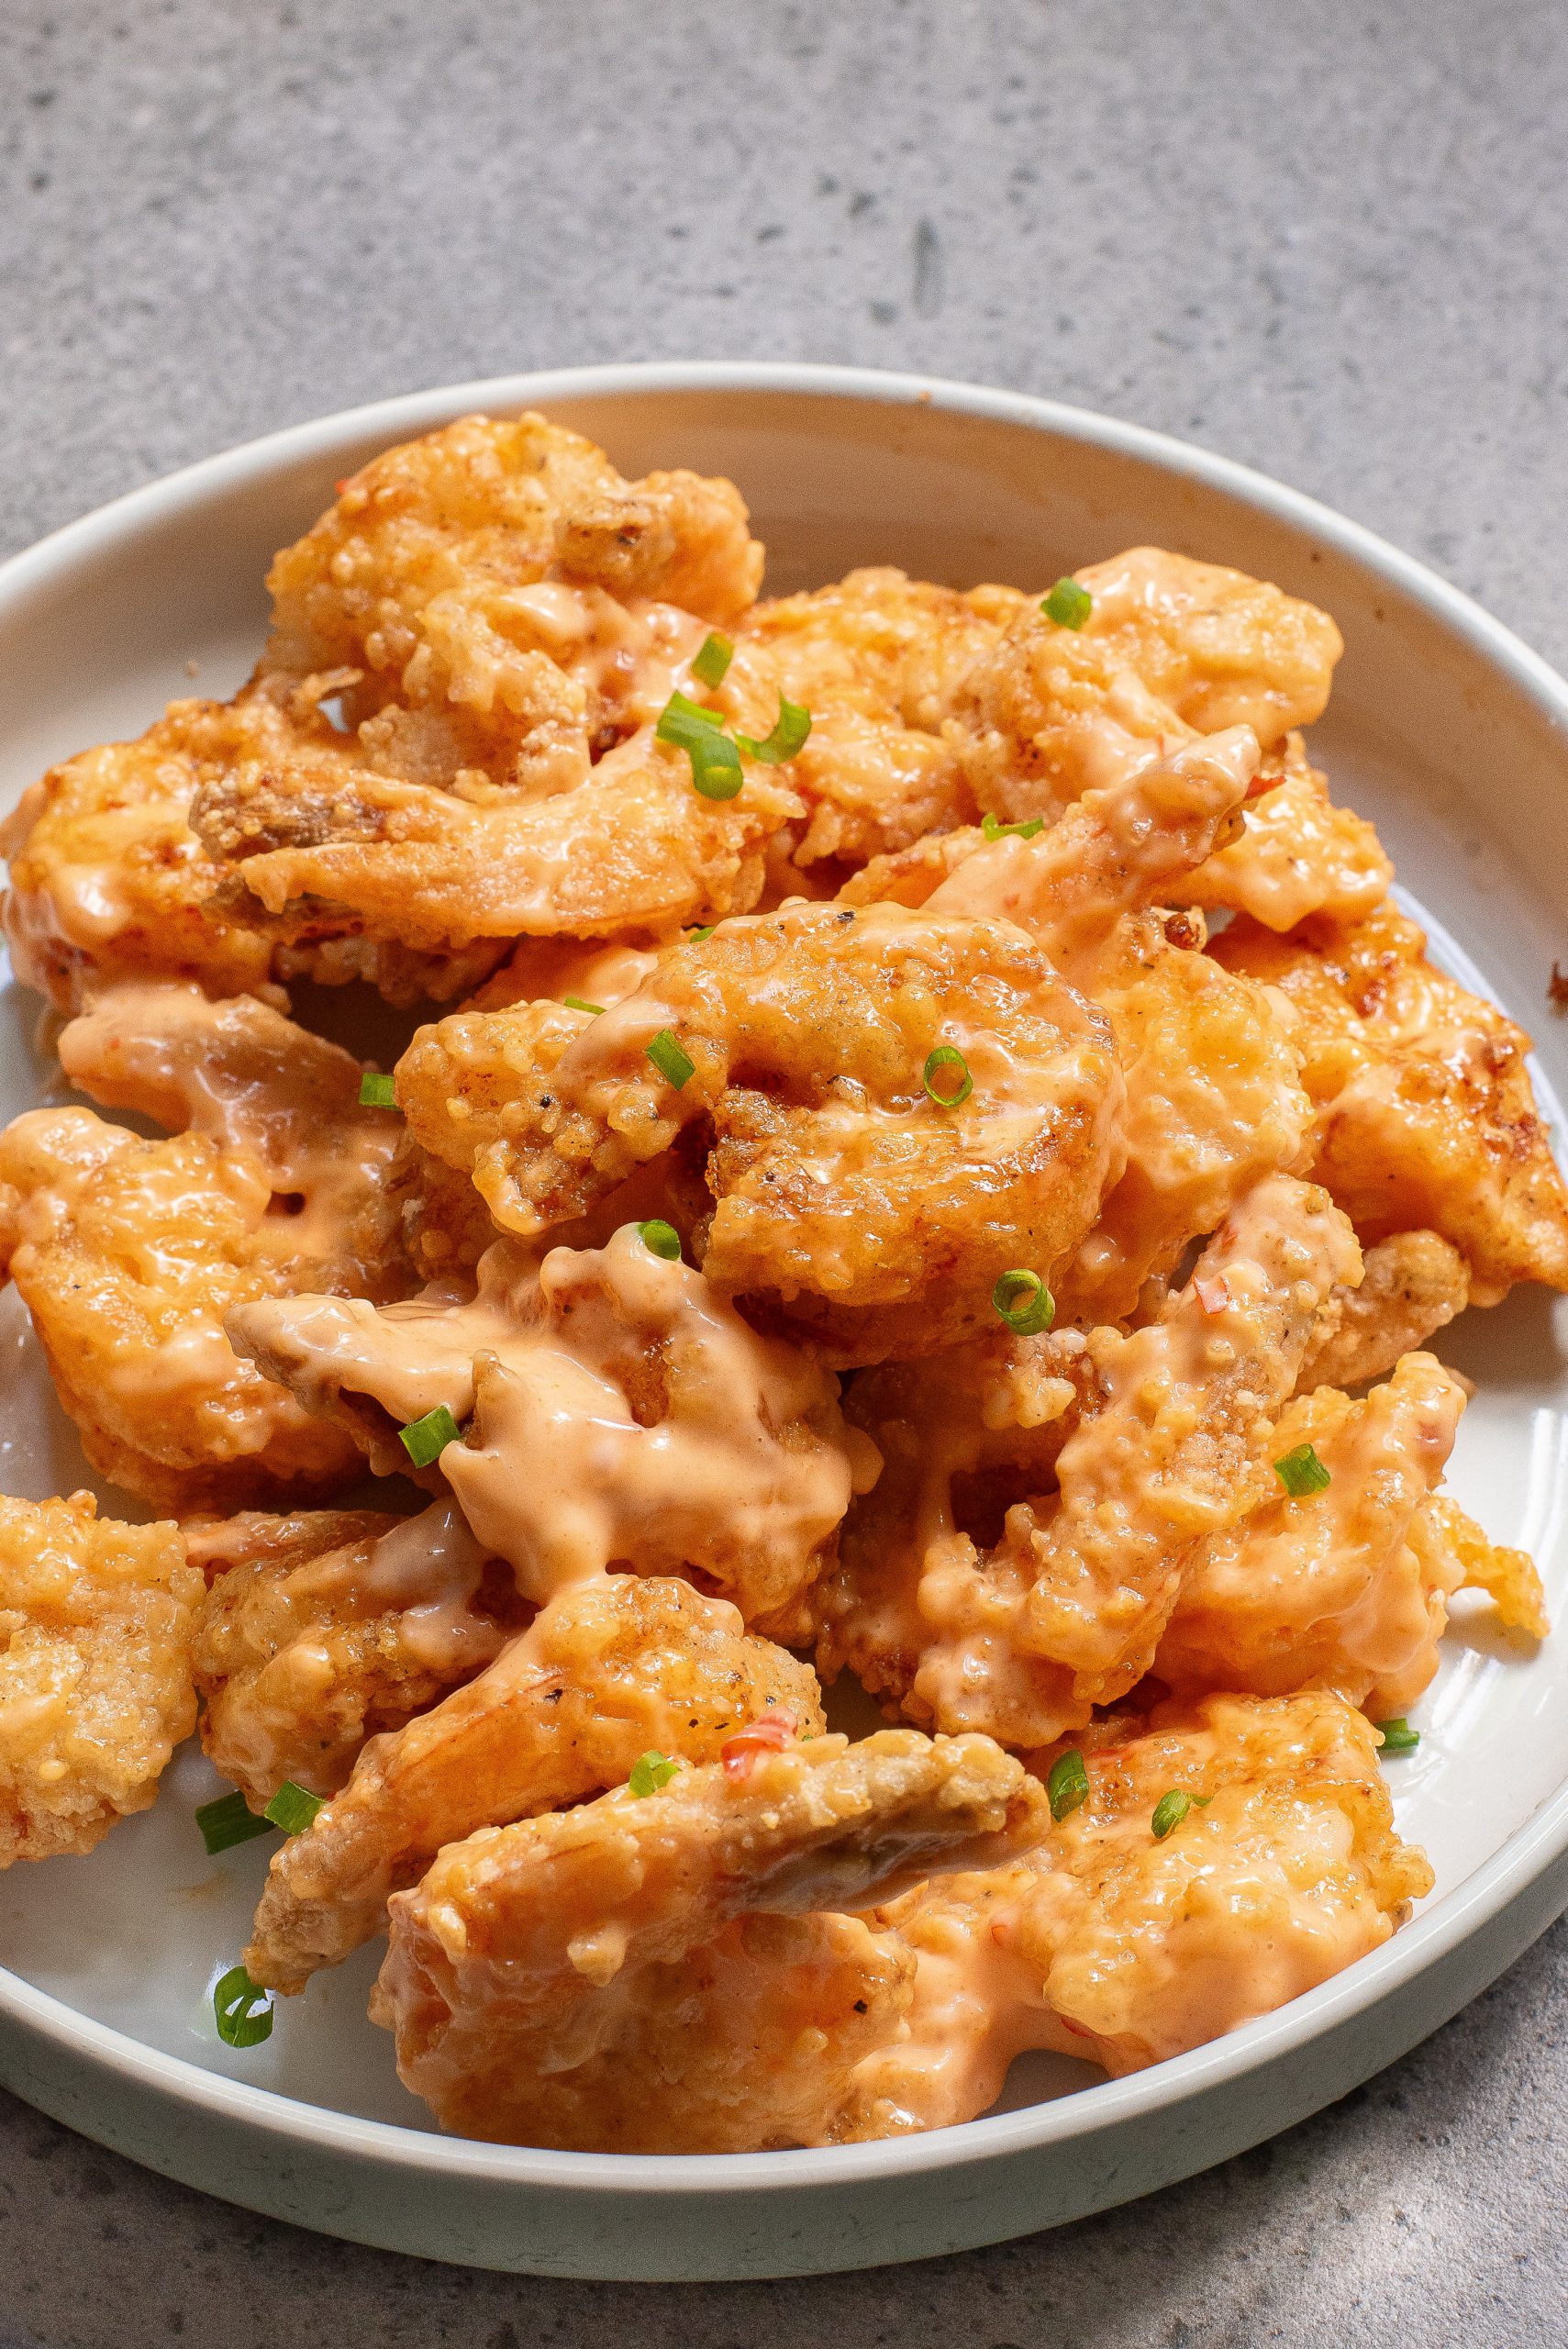 A white plate filled with bang bang shrimp covered in a creamy, orange sauce, garnished with chopped green onions.